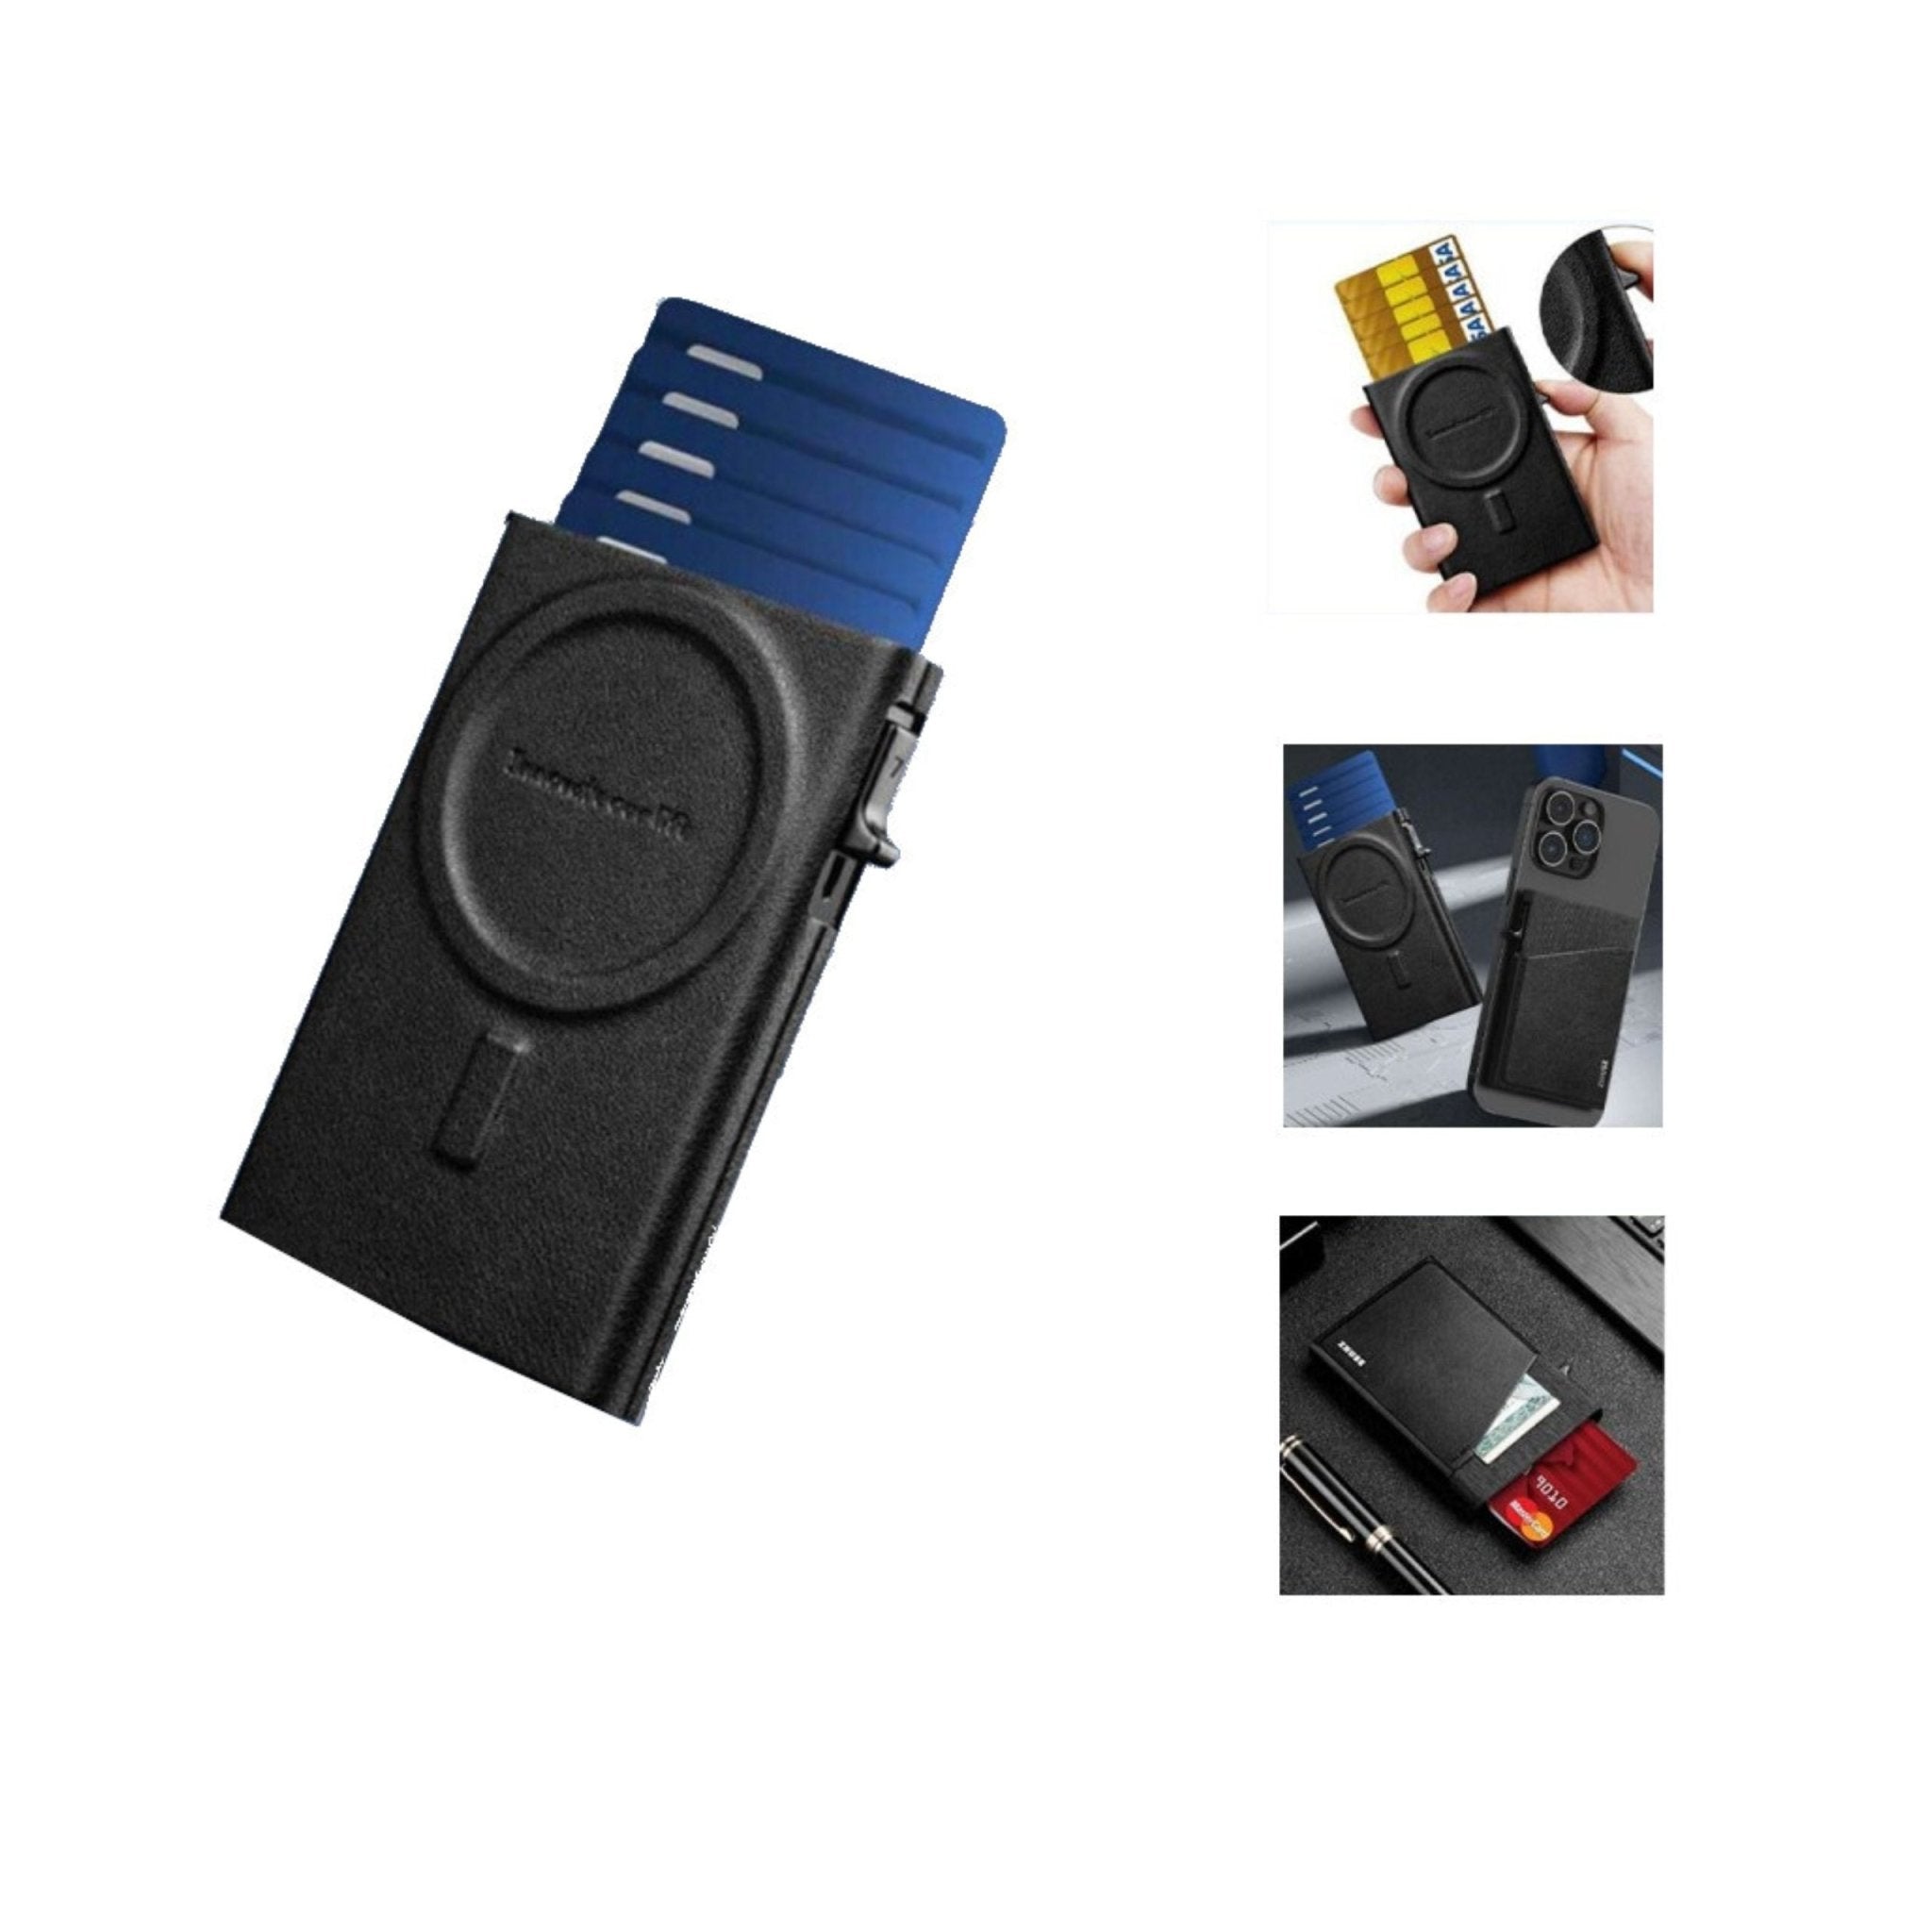 Zhuse Function Card Package Automatically Eject Card - Black